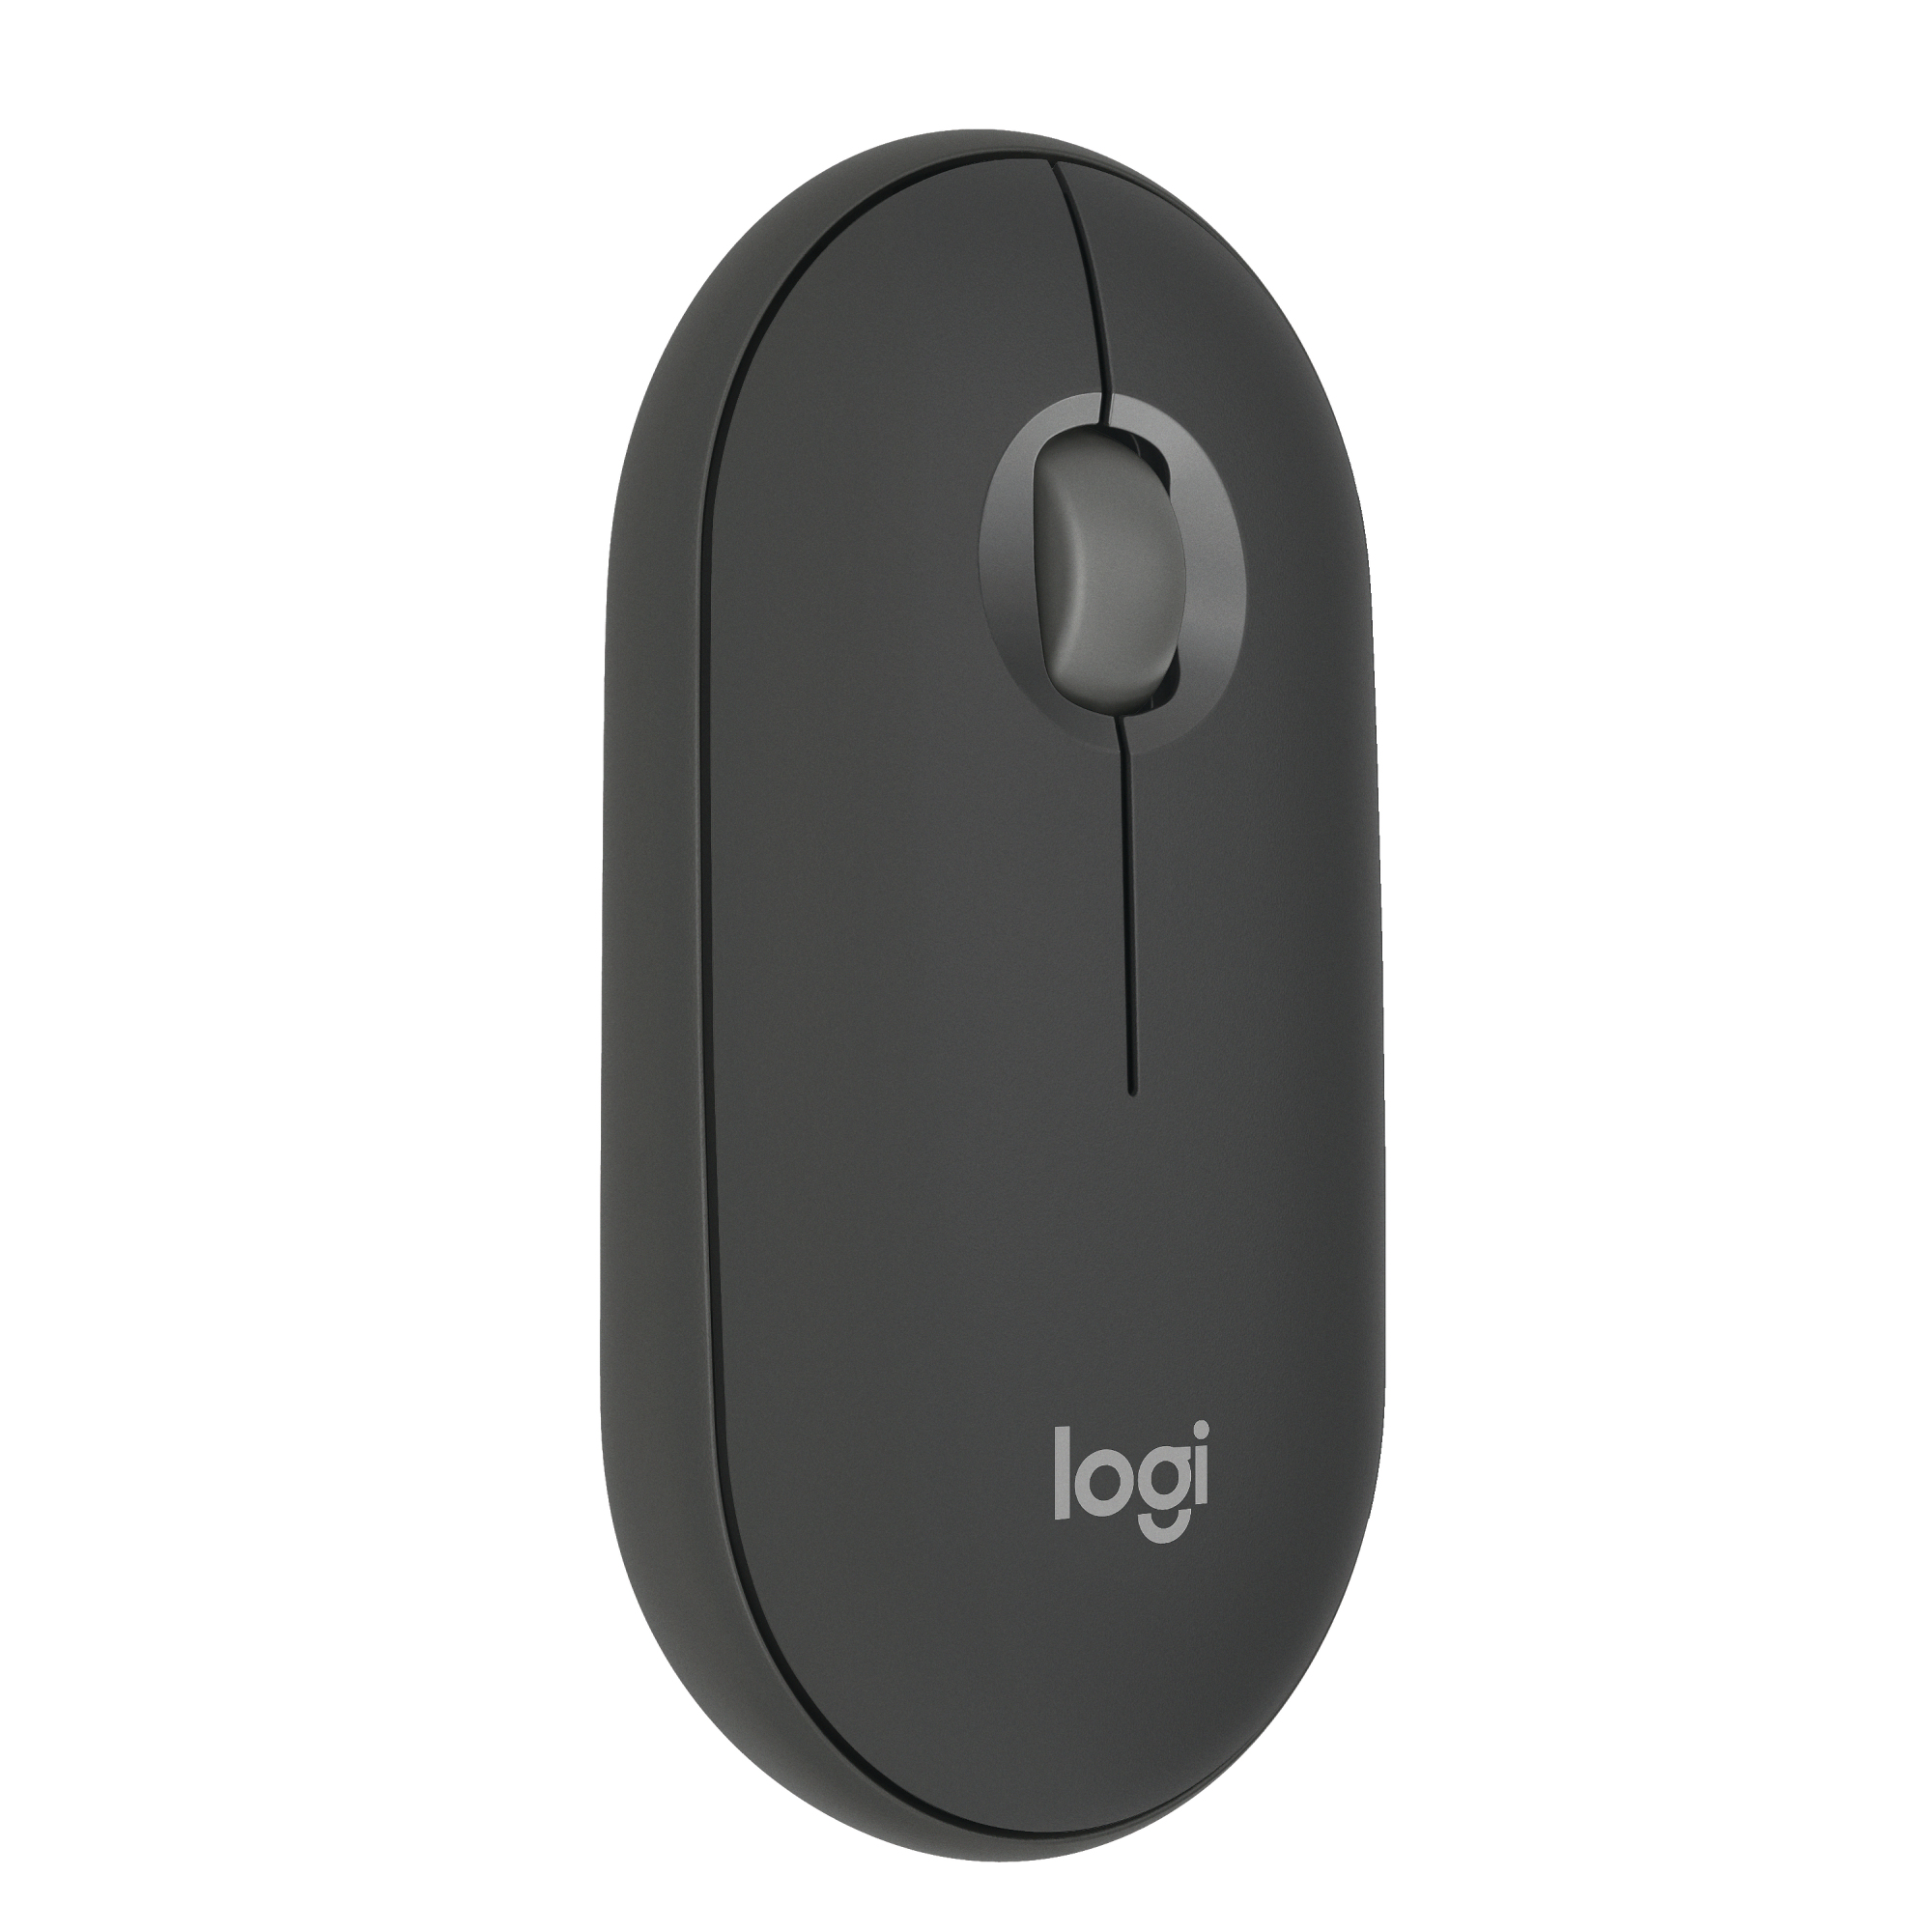 MOUSE M350 LOG PEBBLE II GRAPHITE CON SCROLLING BLUETOOTH